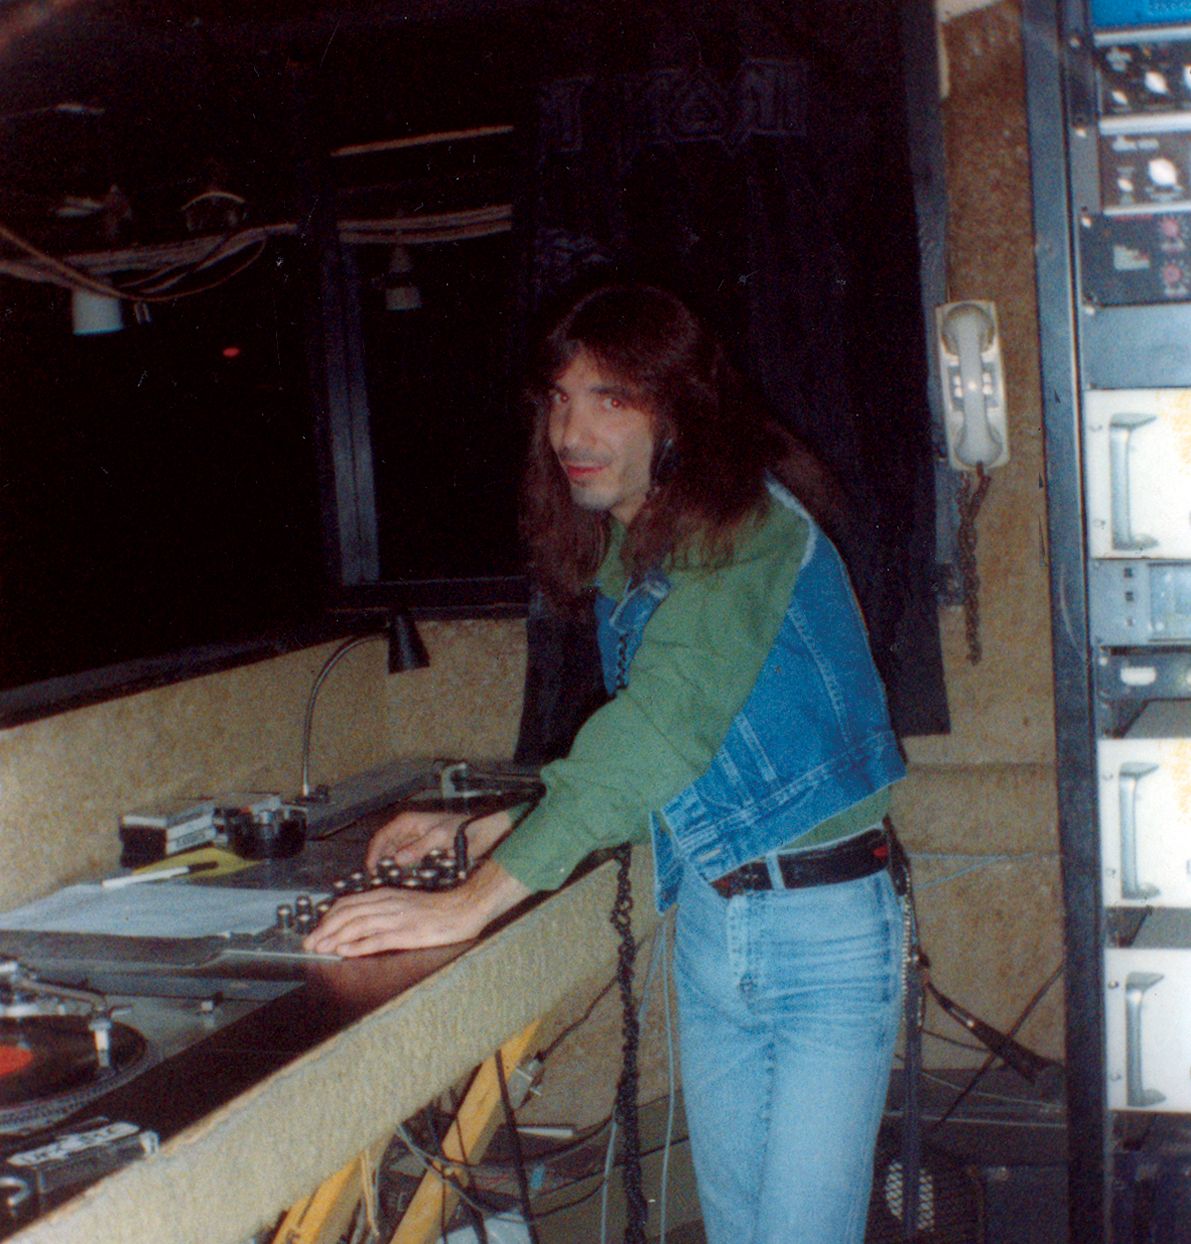 Kayne honing his craft in L'Amour's early days, circa 1981 (image courtesy of Alex Kayne).